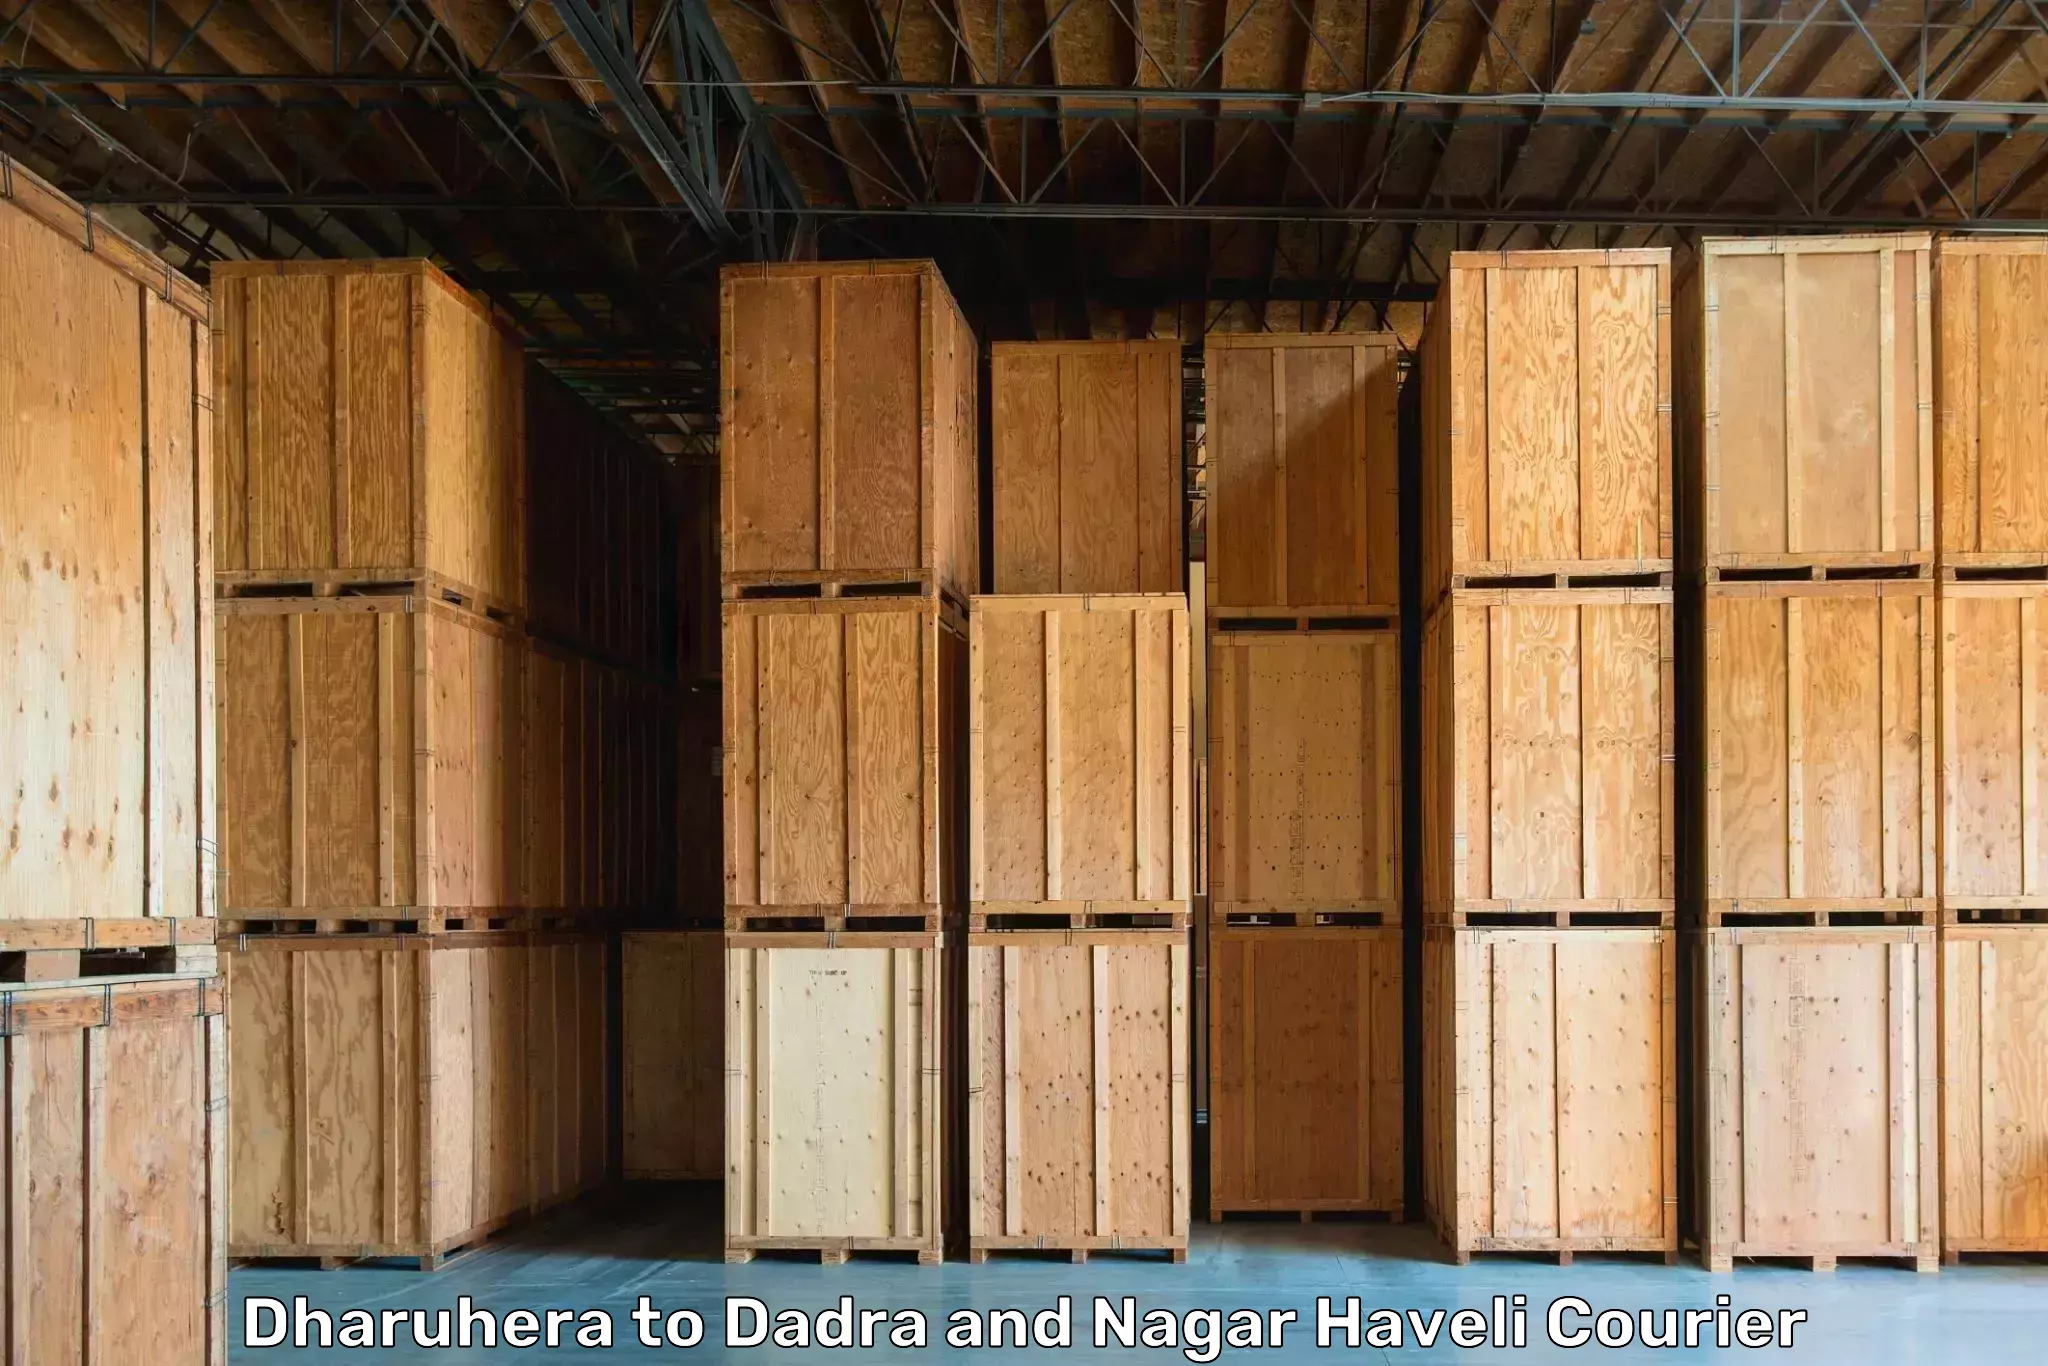 Customized relocation services in Dharuhera to Dadra and Nagar Haveli